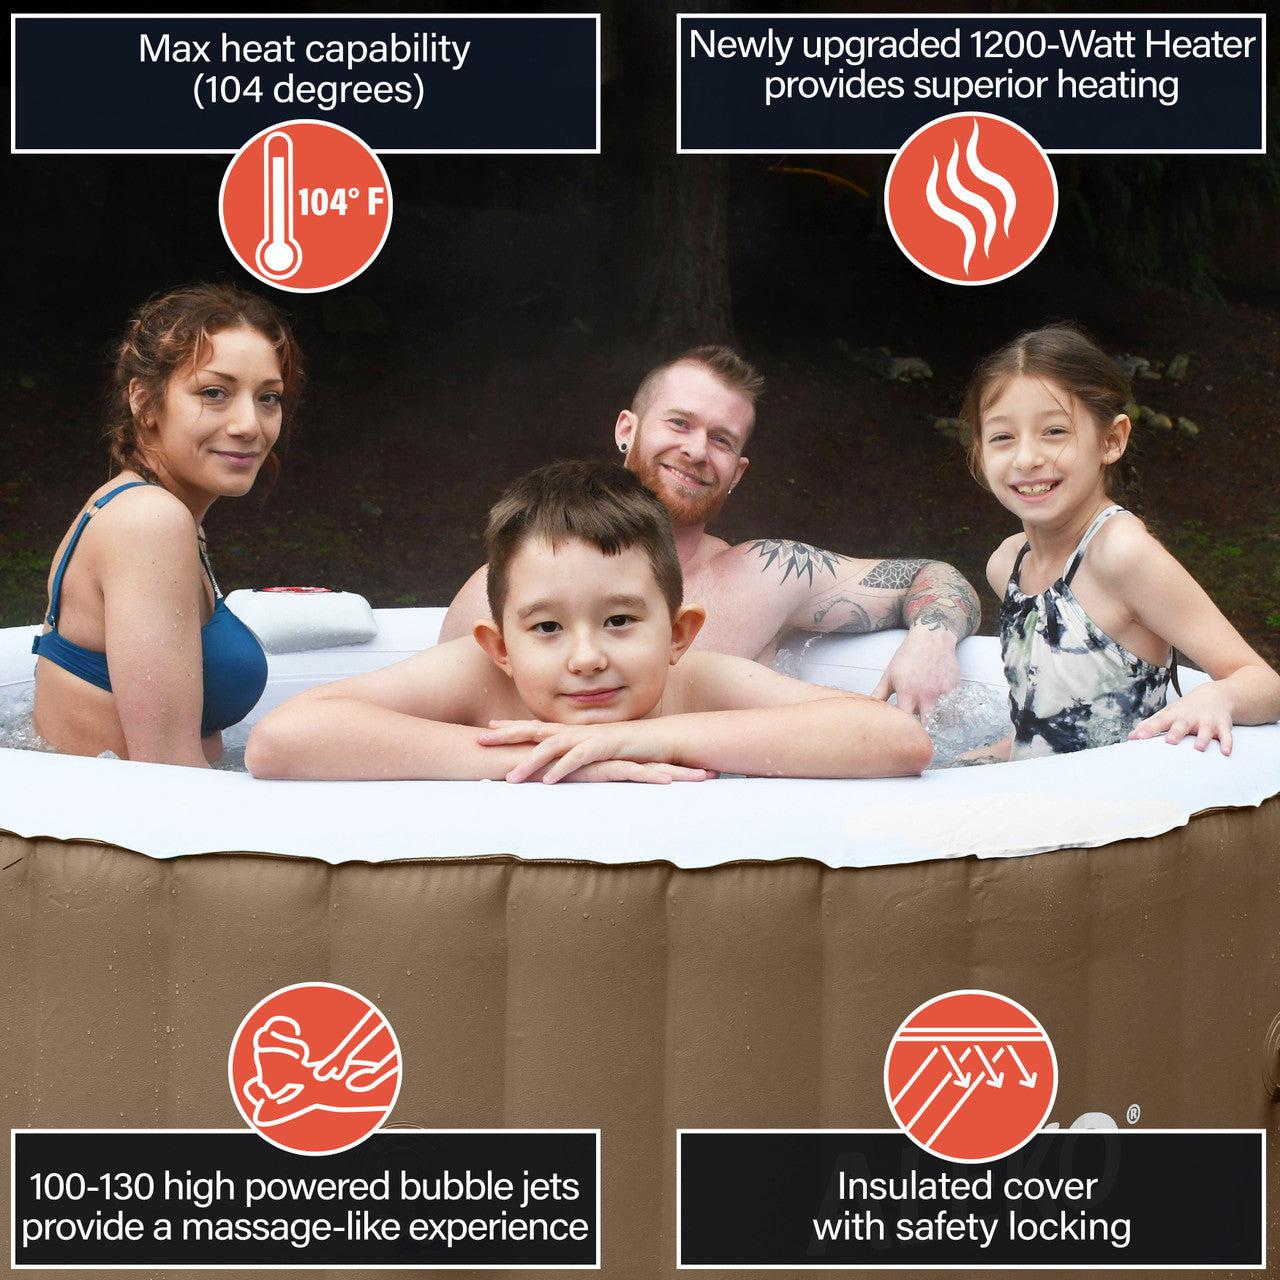 ALEKO 4 Person Brown and White 210 Gallon Round Inflatable Jetted Hot Tub with Cover - Purely Relaxation